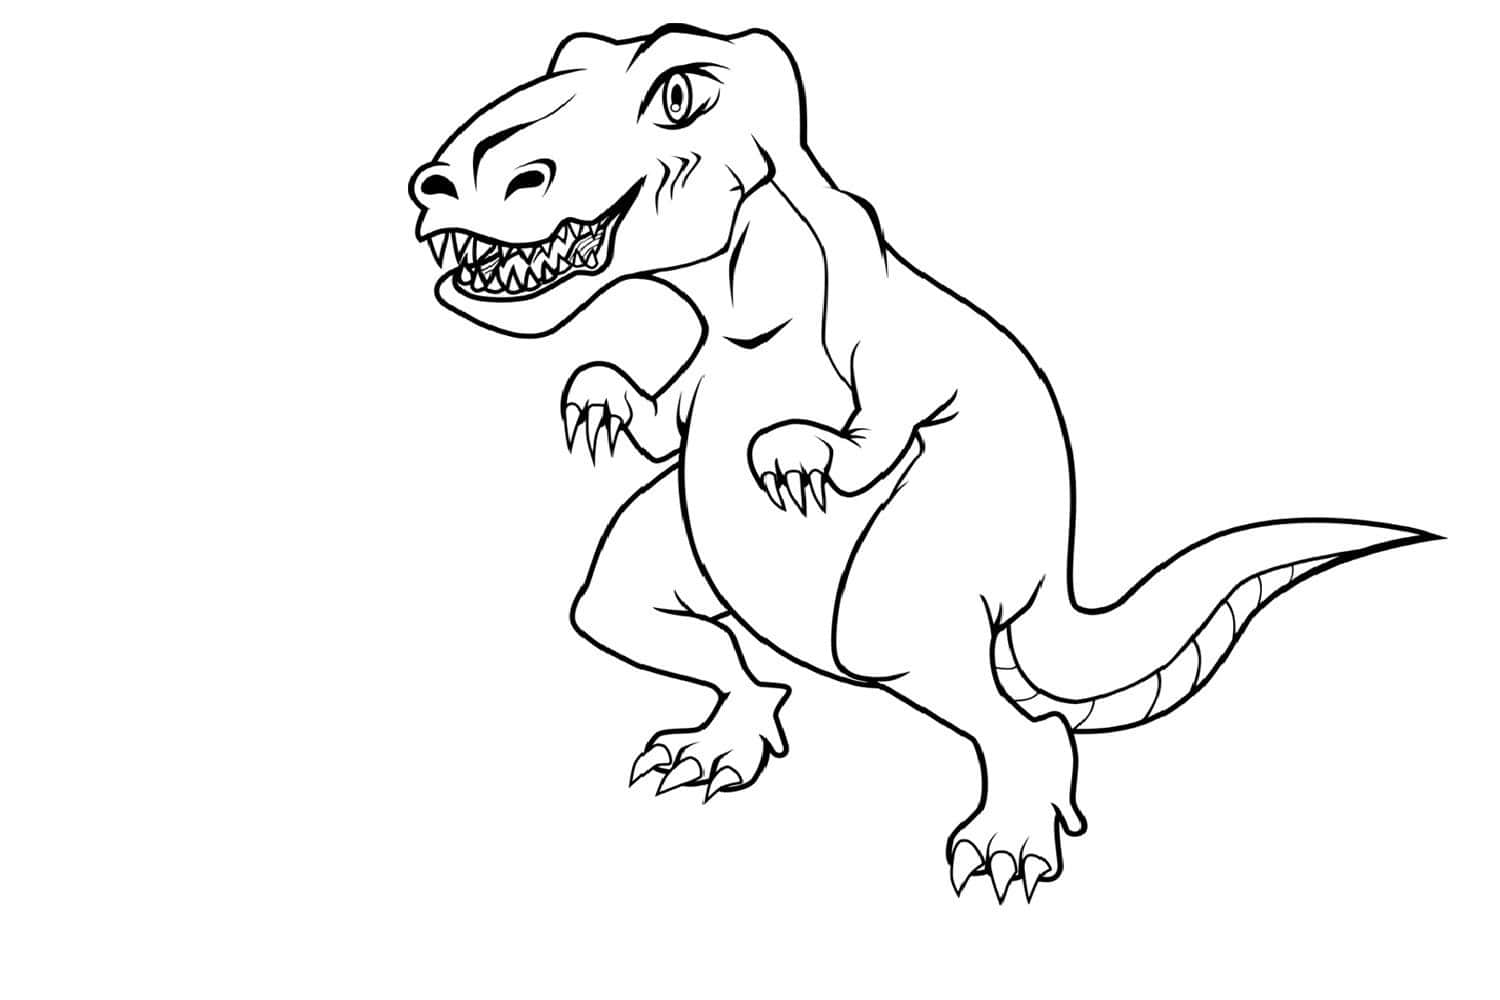 A T - Rex Coloring Page